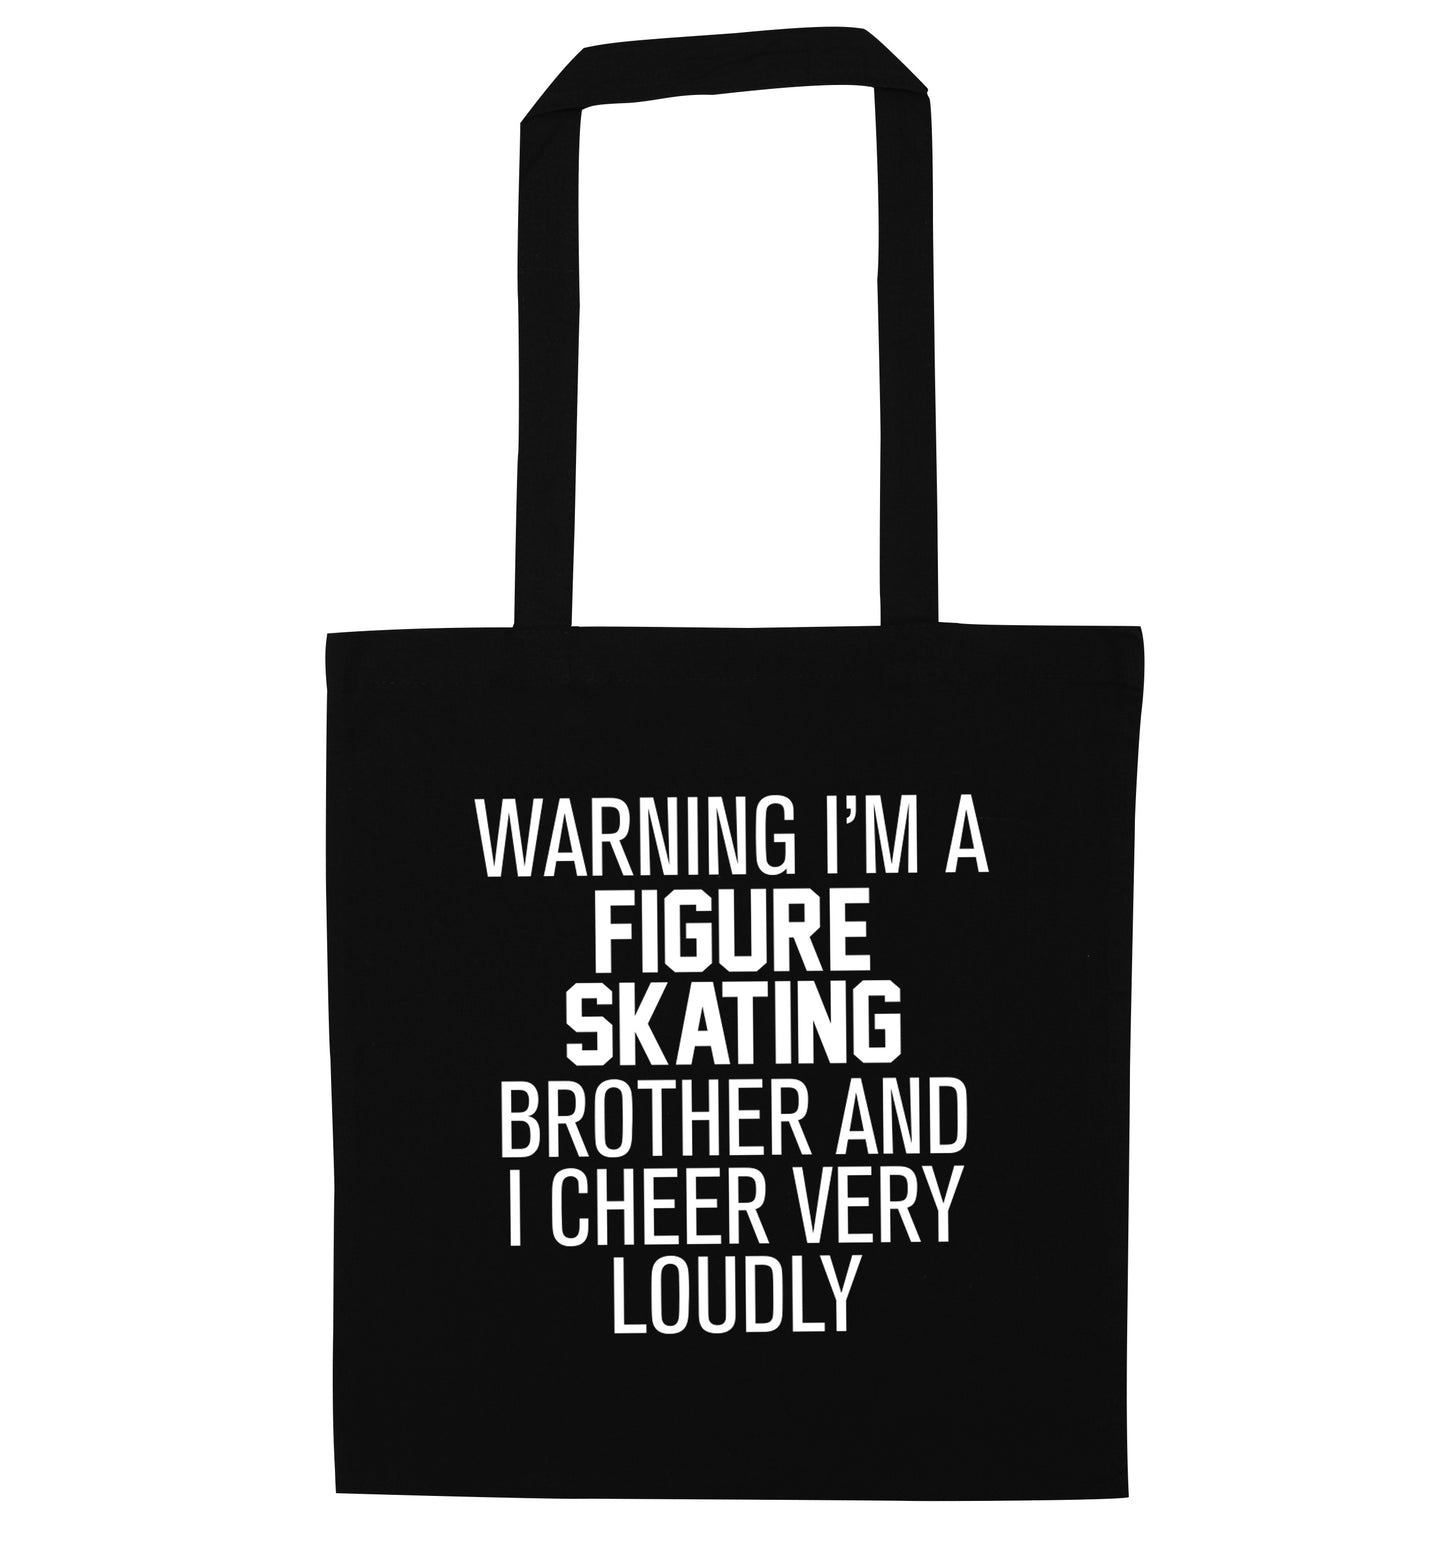 Warning I'm a figure skating brother and I cheer very loudly black tote bag